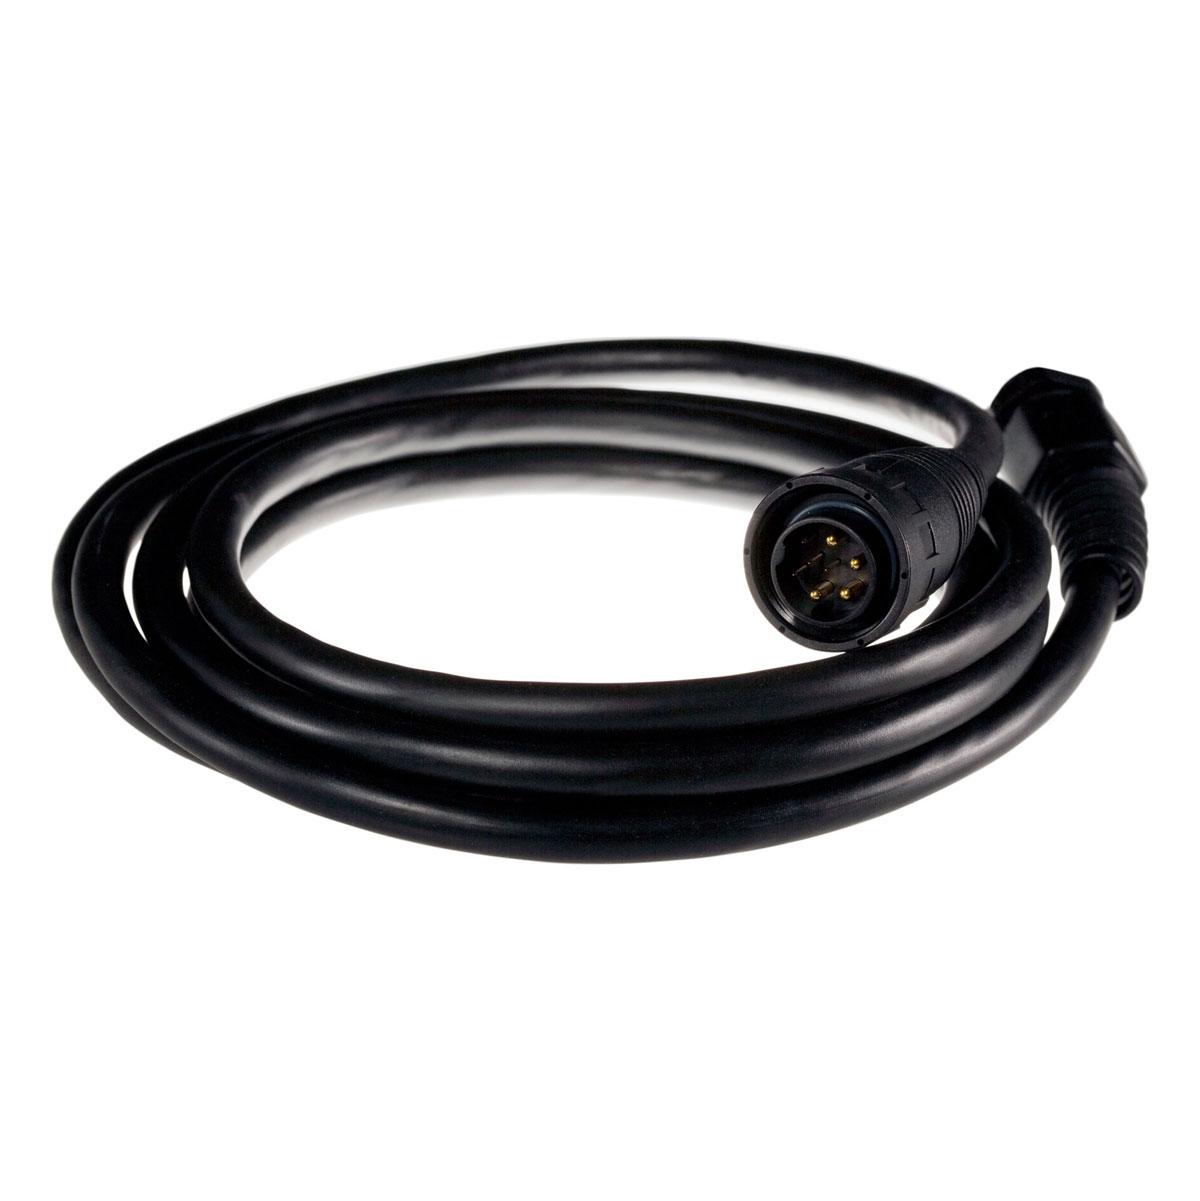 Torqeedo Motor extension cable